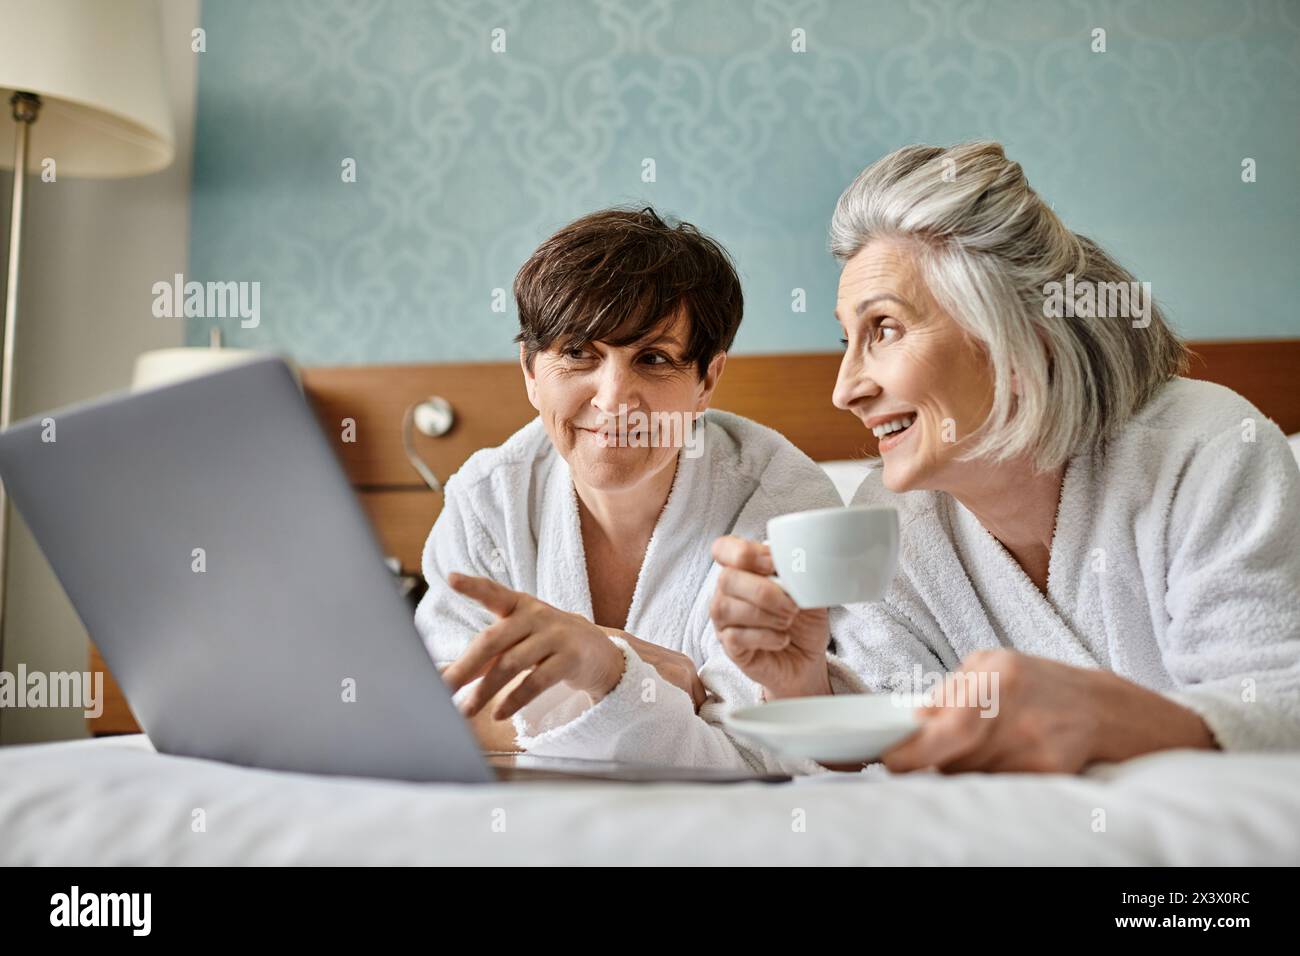 Two women, senior lesbian couple, sit on bed, engrossed with laptop screen in tender moment. Stock Photo